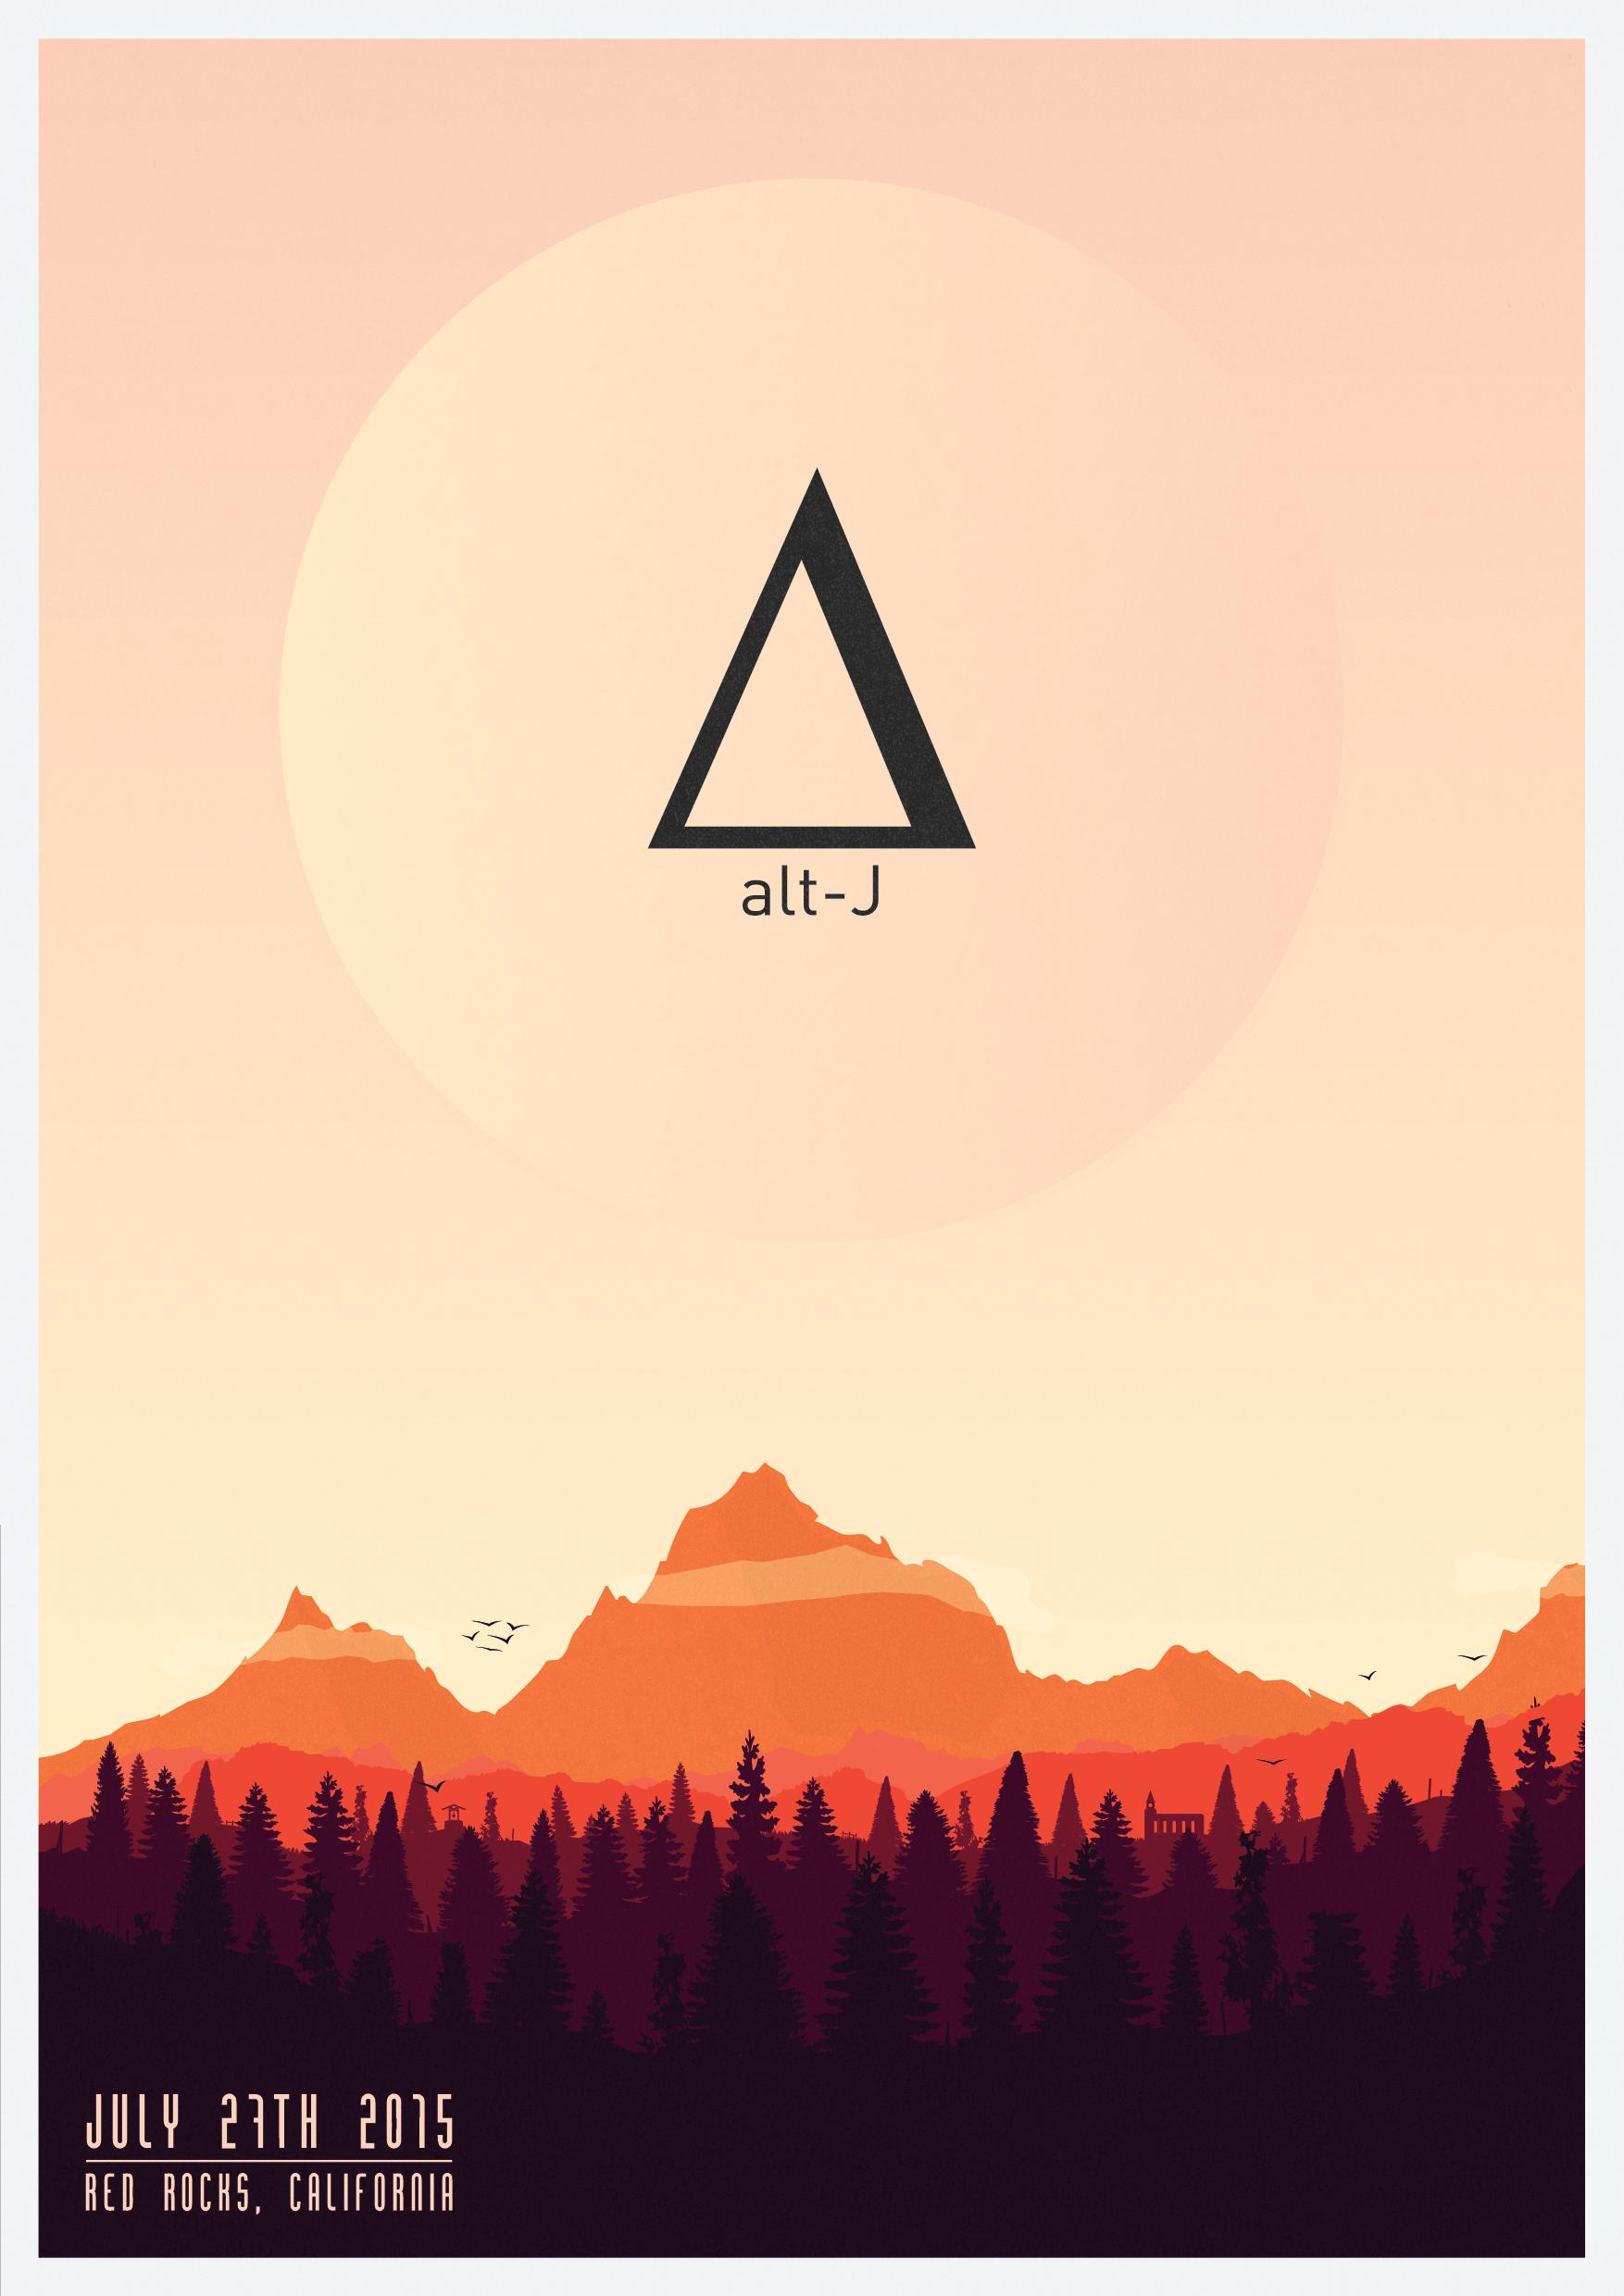 Alt-J Logo - I know it's a little late, but wanted to make some concept art for ...